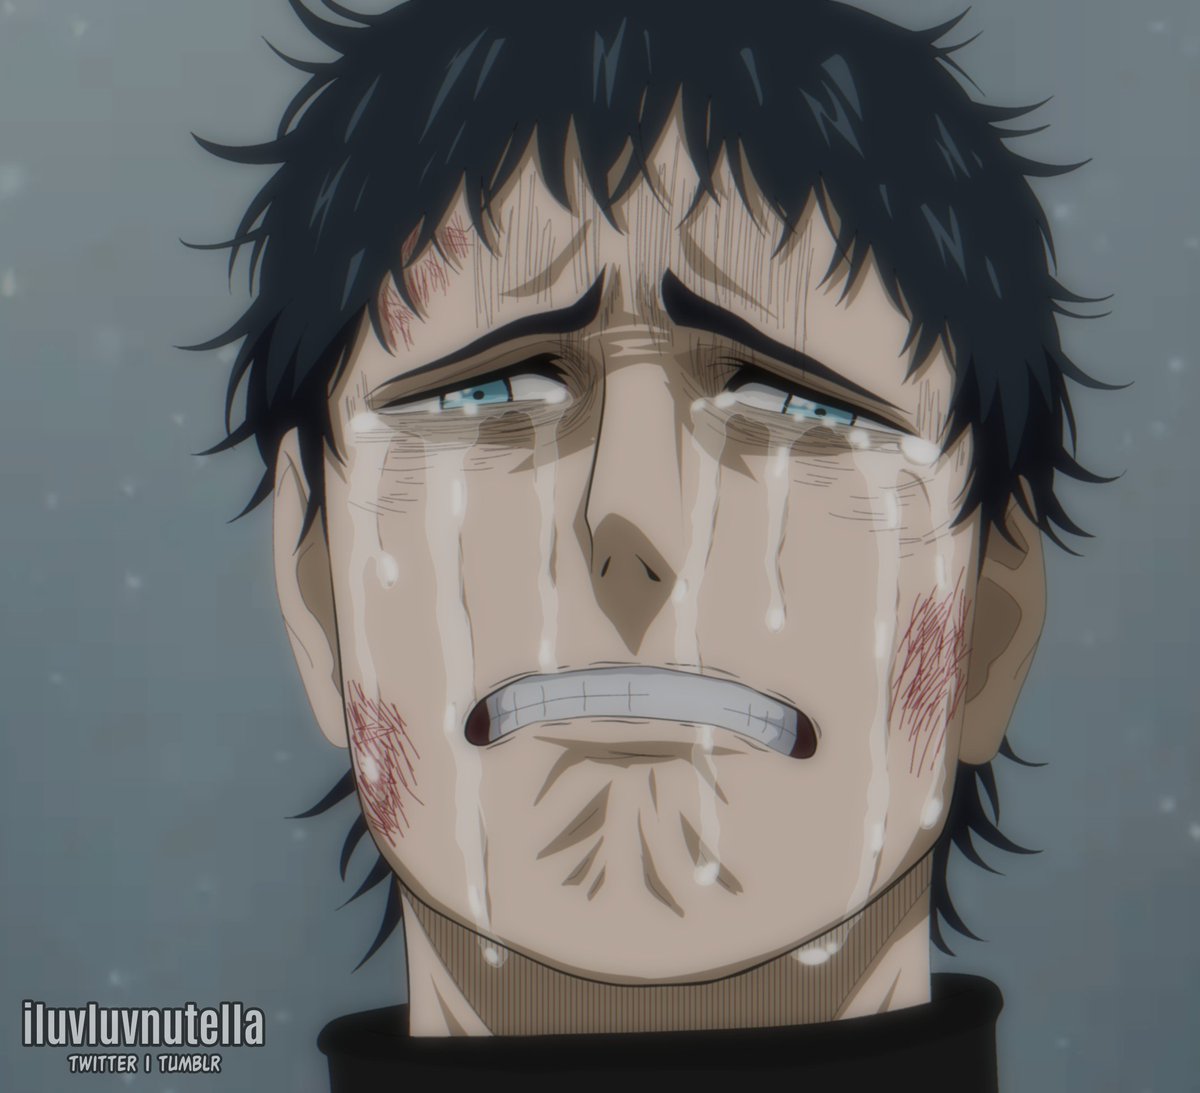 「Crying Zenon 🥺😔
#mycoloring
#BCSpoiler」|d o n n a 🎨🖌coloring comms openのイラスト